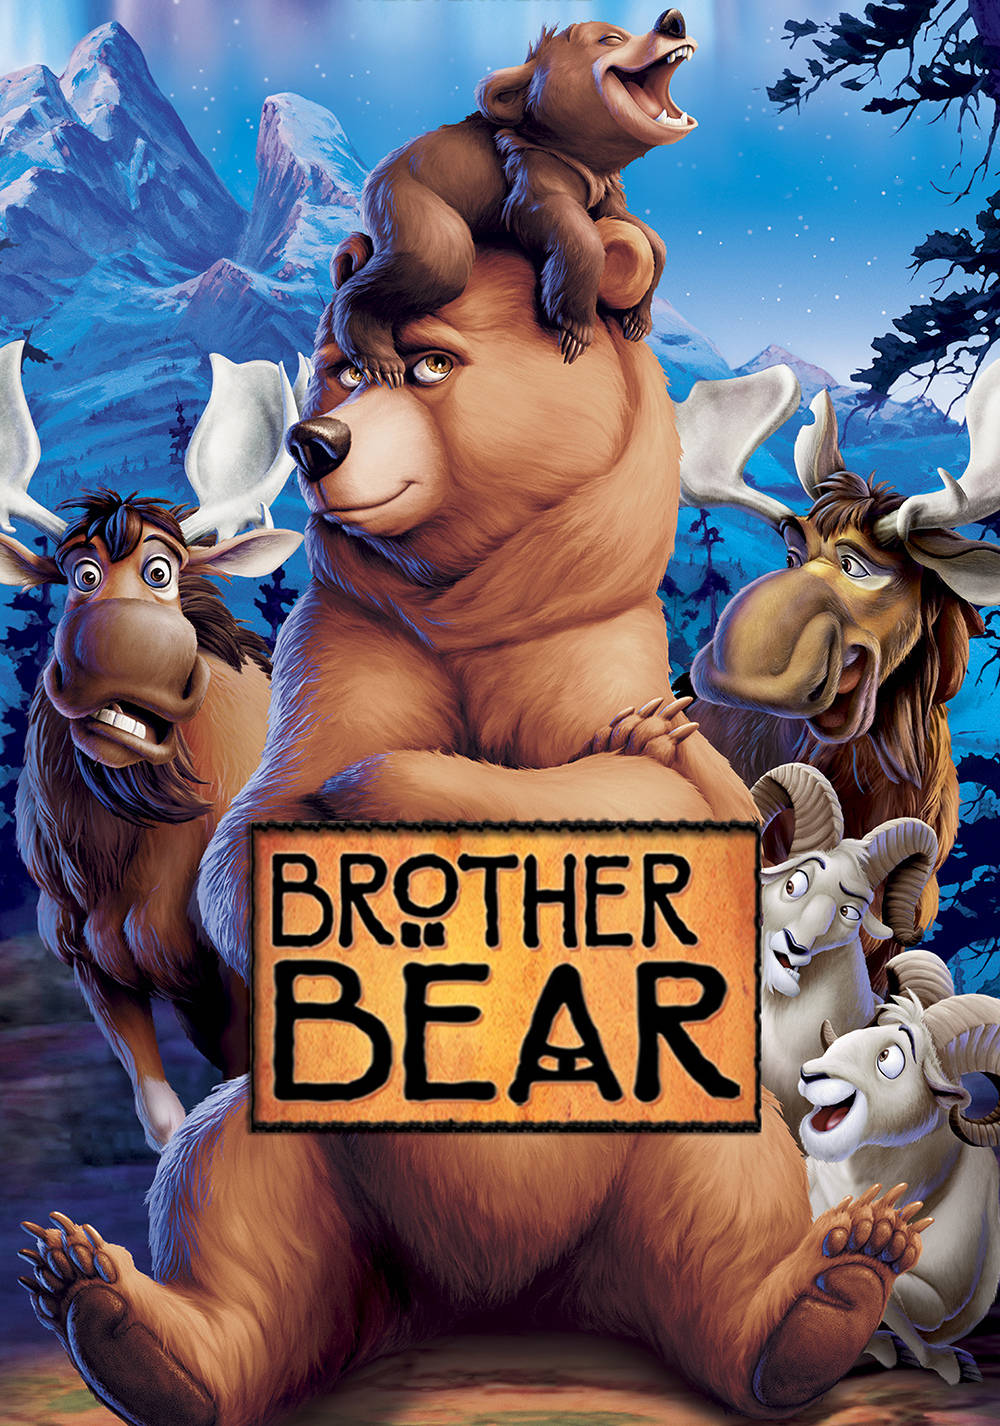 Brother Bear Movie Poster Wallpaper